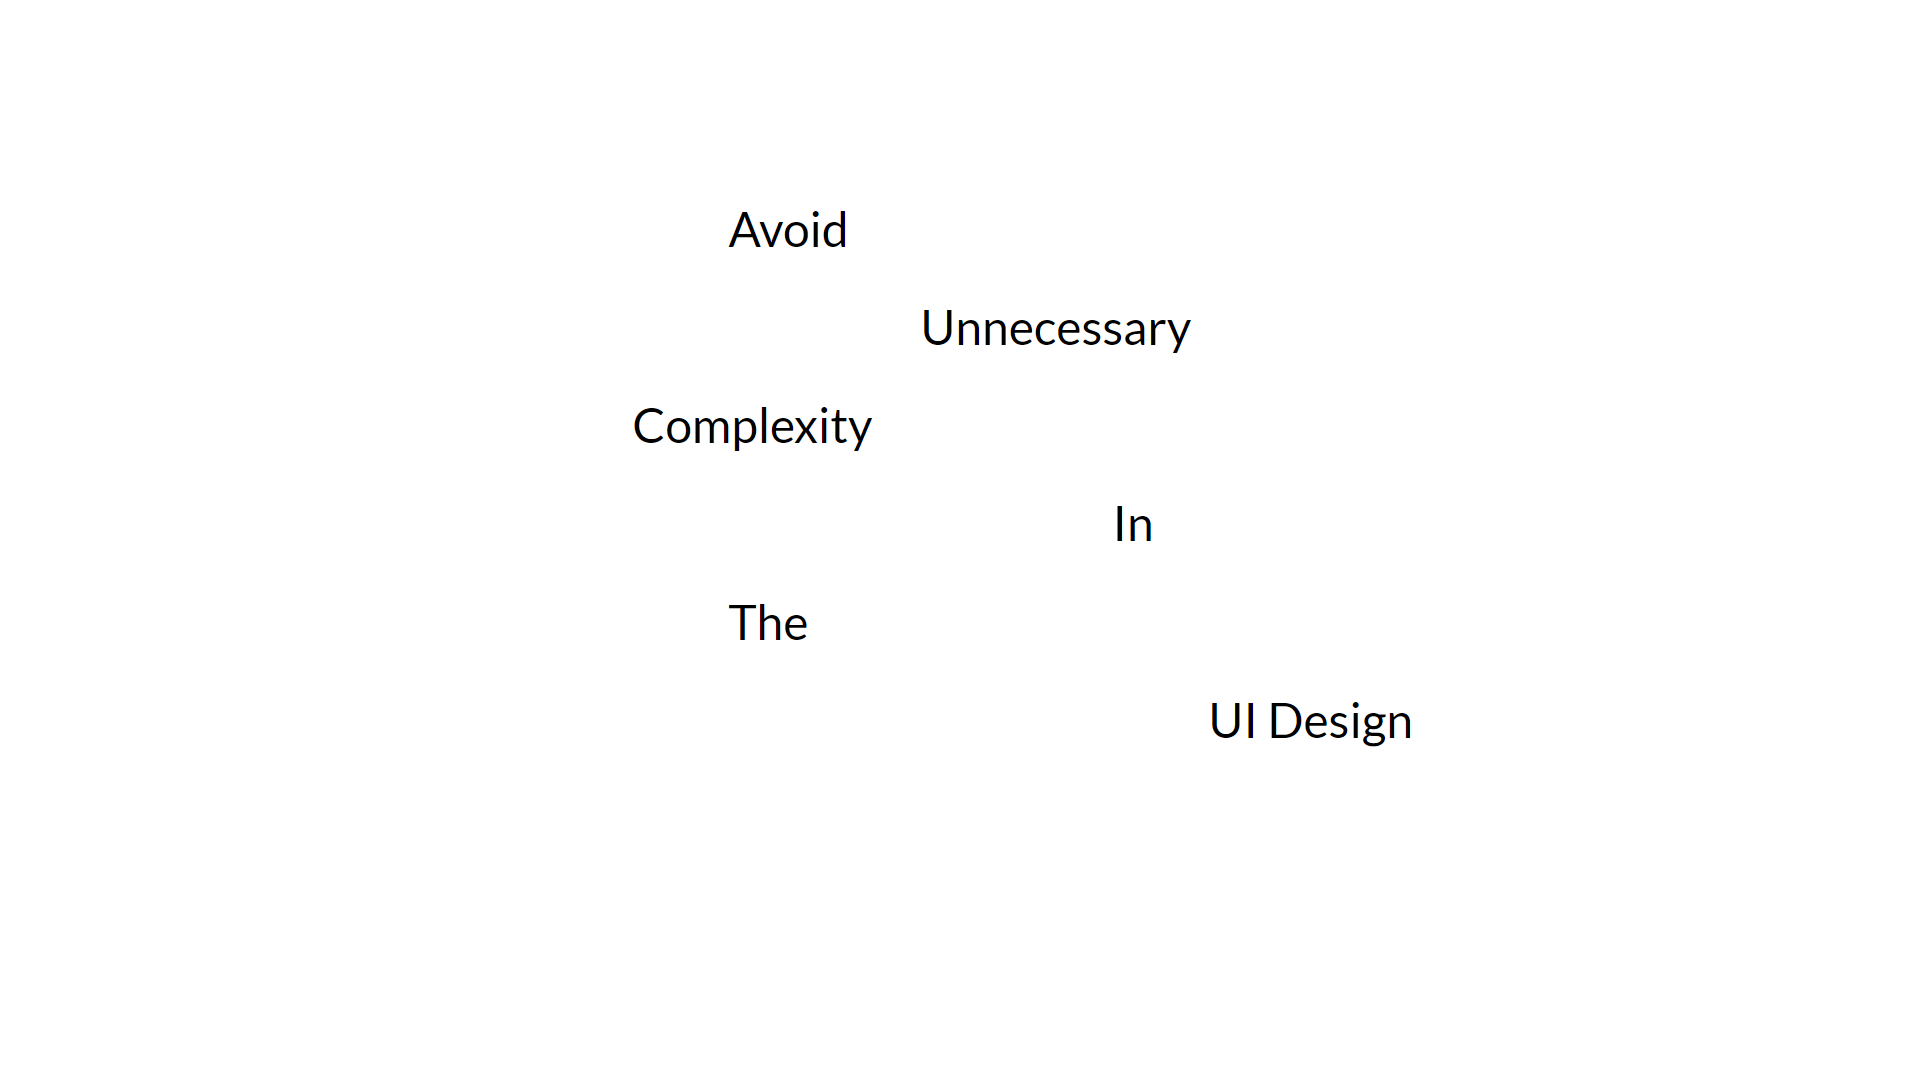 A snippet from the slides of Fundamental Design Principles